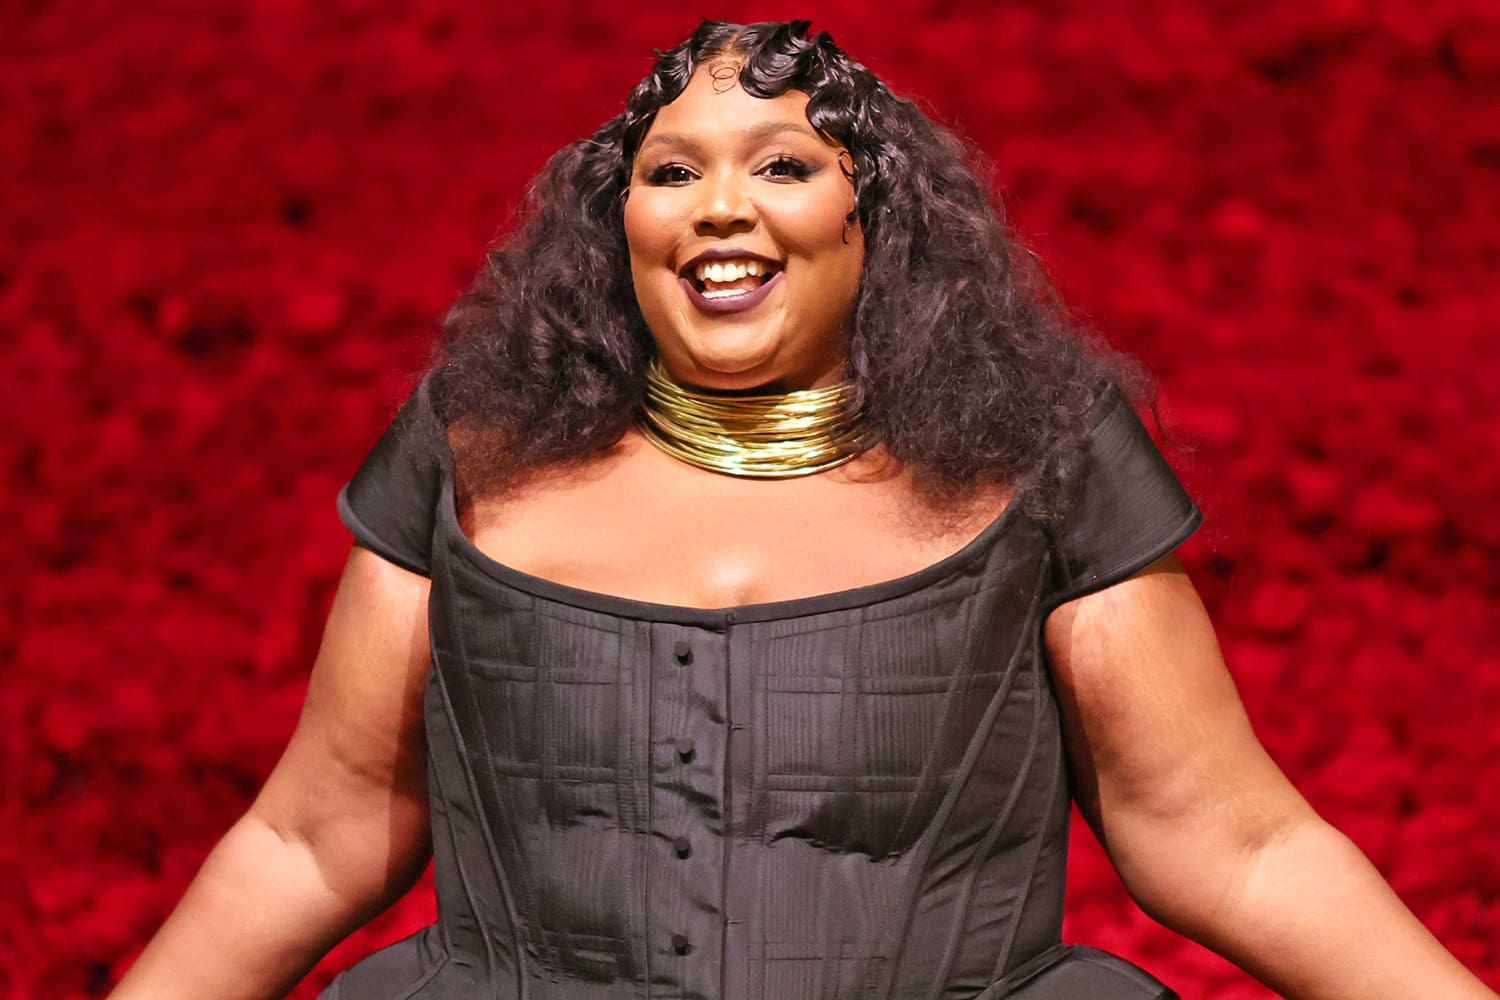 lizzo-shades-liam-payne-and-gives-her-opinion-on-his-statements-made-on-implausive-podcast-interview